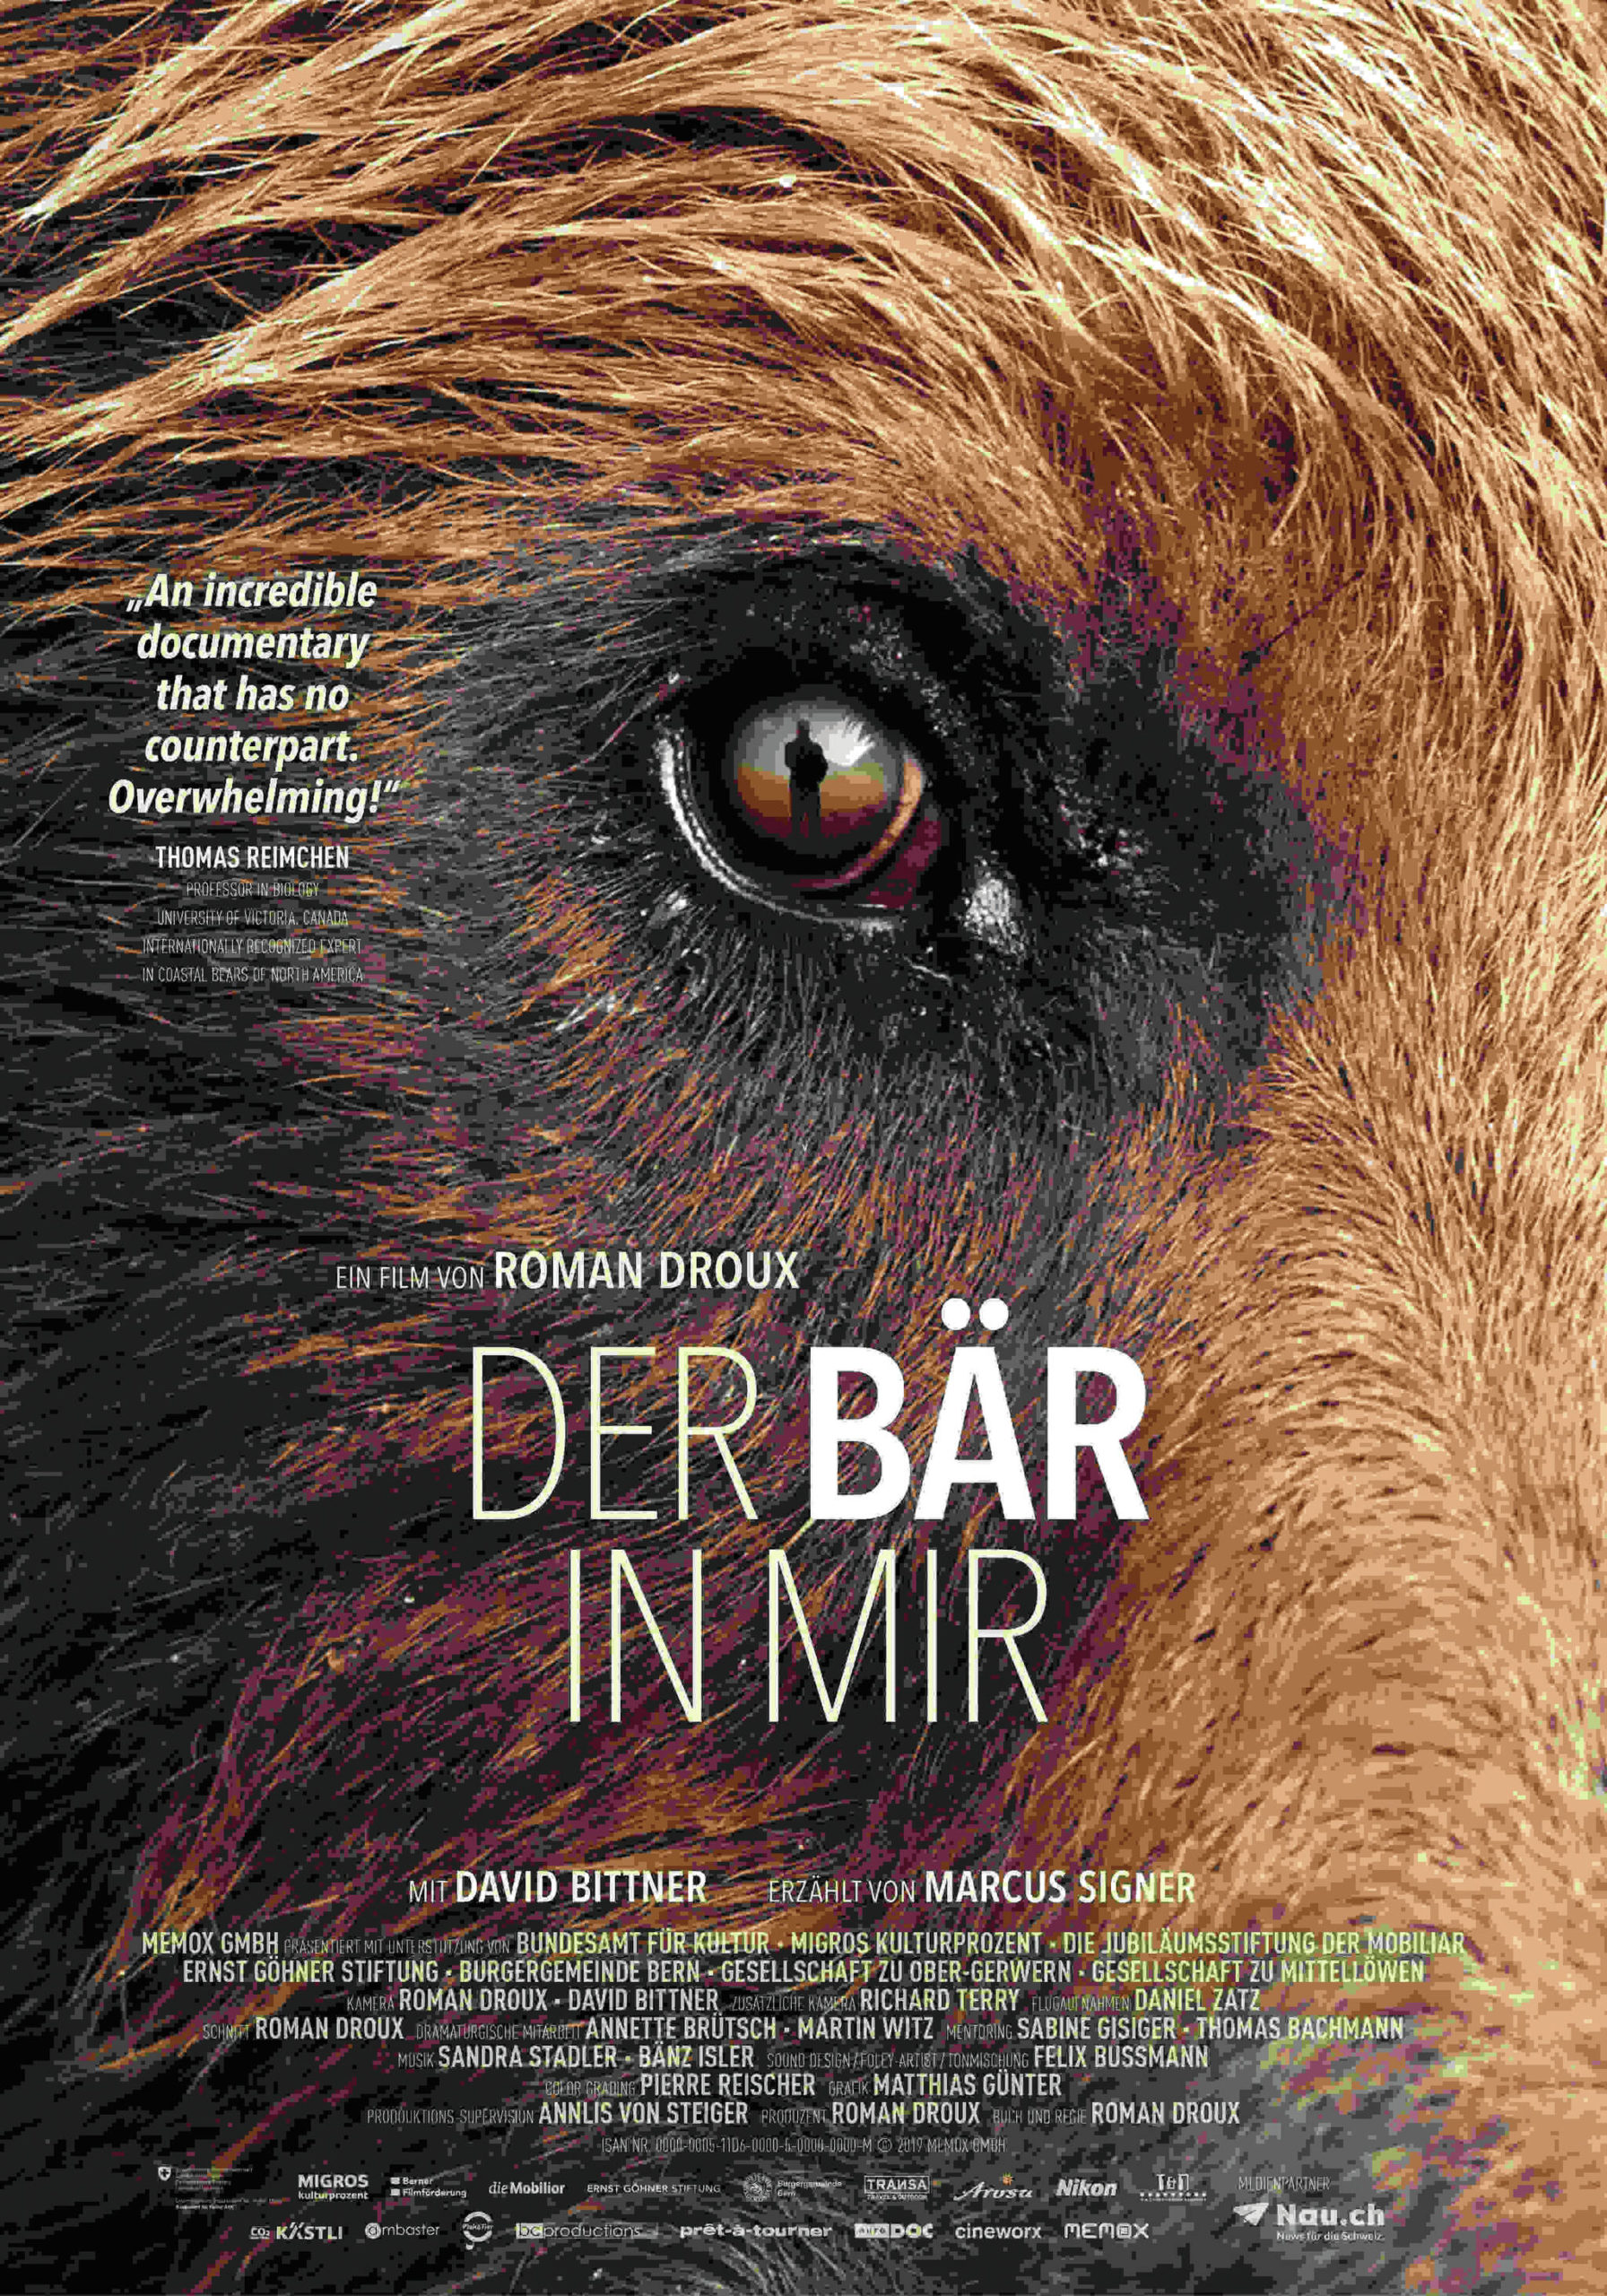 The poster for “Der baer in mir (the Bear in Me)” showing at the 17th annual Homer Documentary Film Festival. (Photo provided)